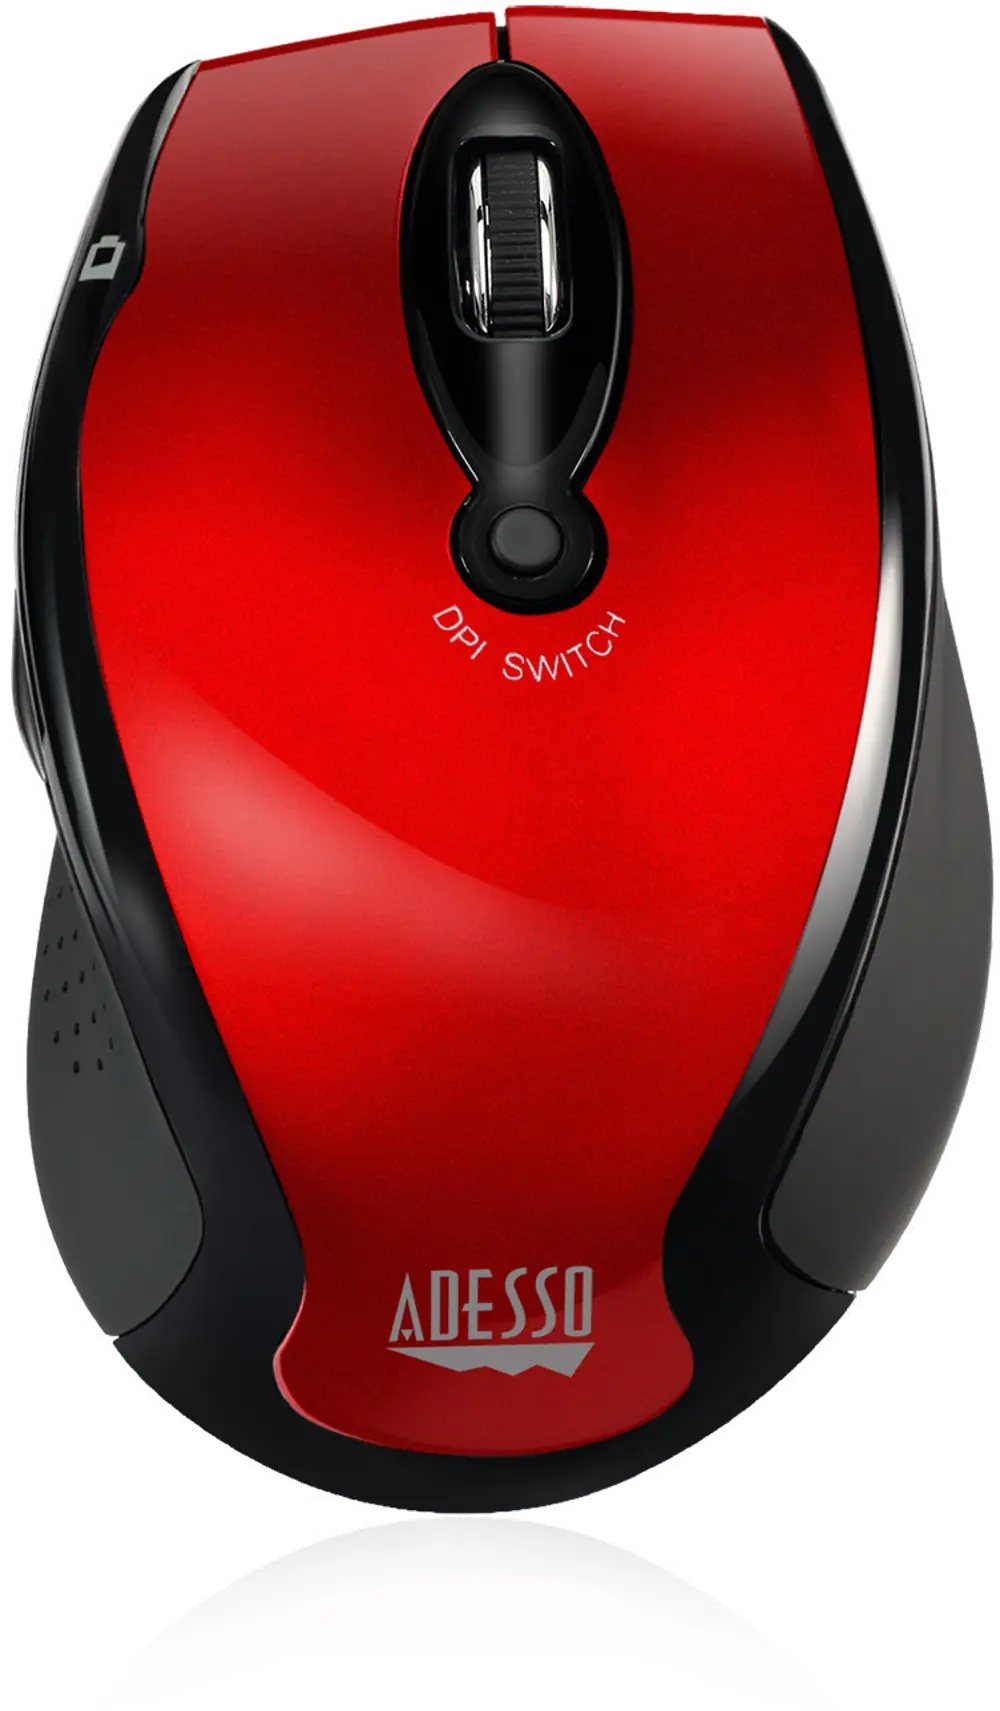 iMOUSE-M20 RED Adesso Red Wireless Ergonomic Optical Mouse - iMouse M20-1